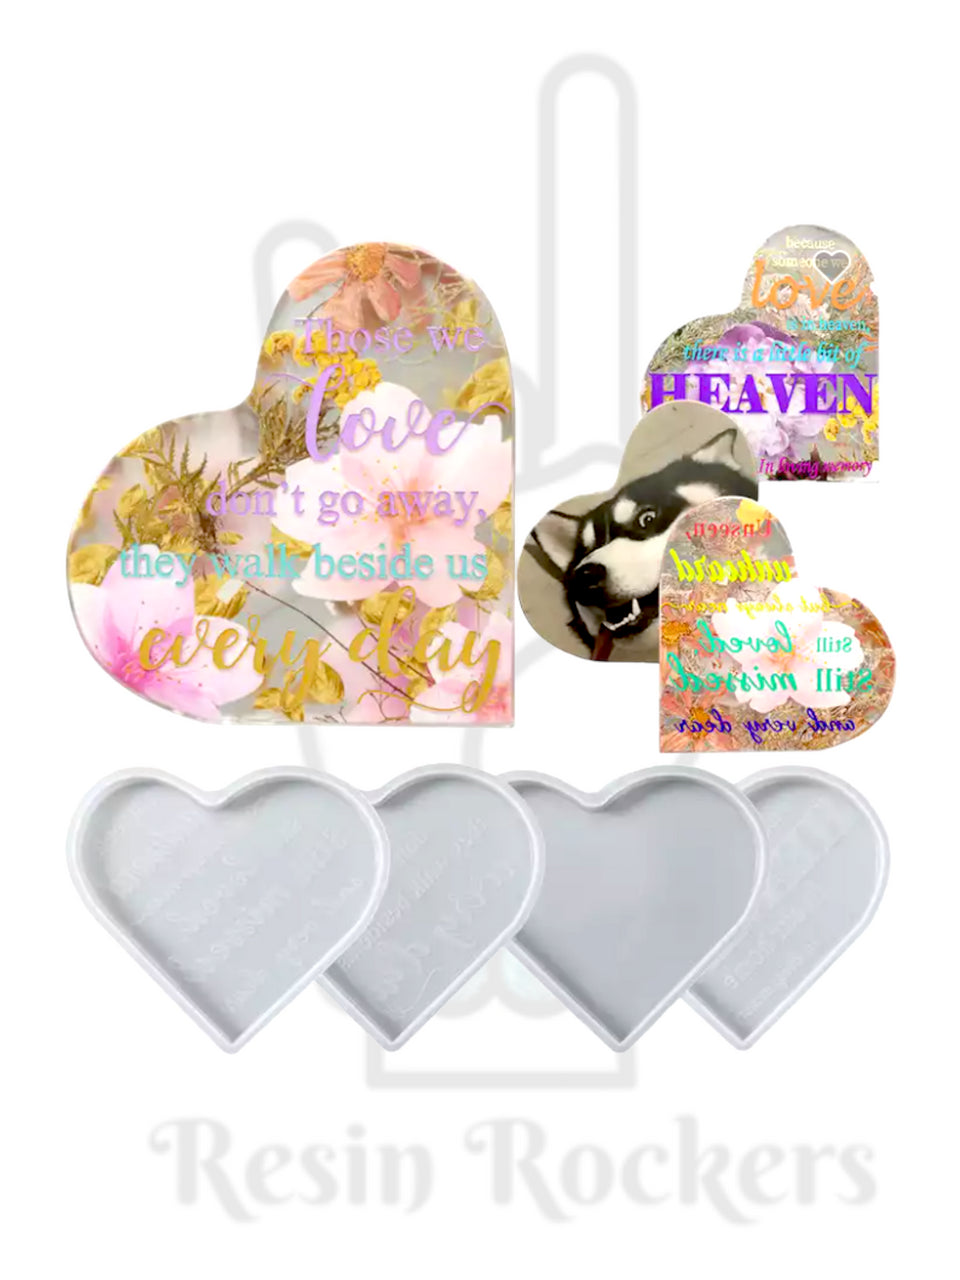 Memorial Remembrance Hearts 4pc Mold Set for Epoxy Resin Art